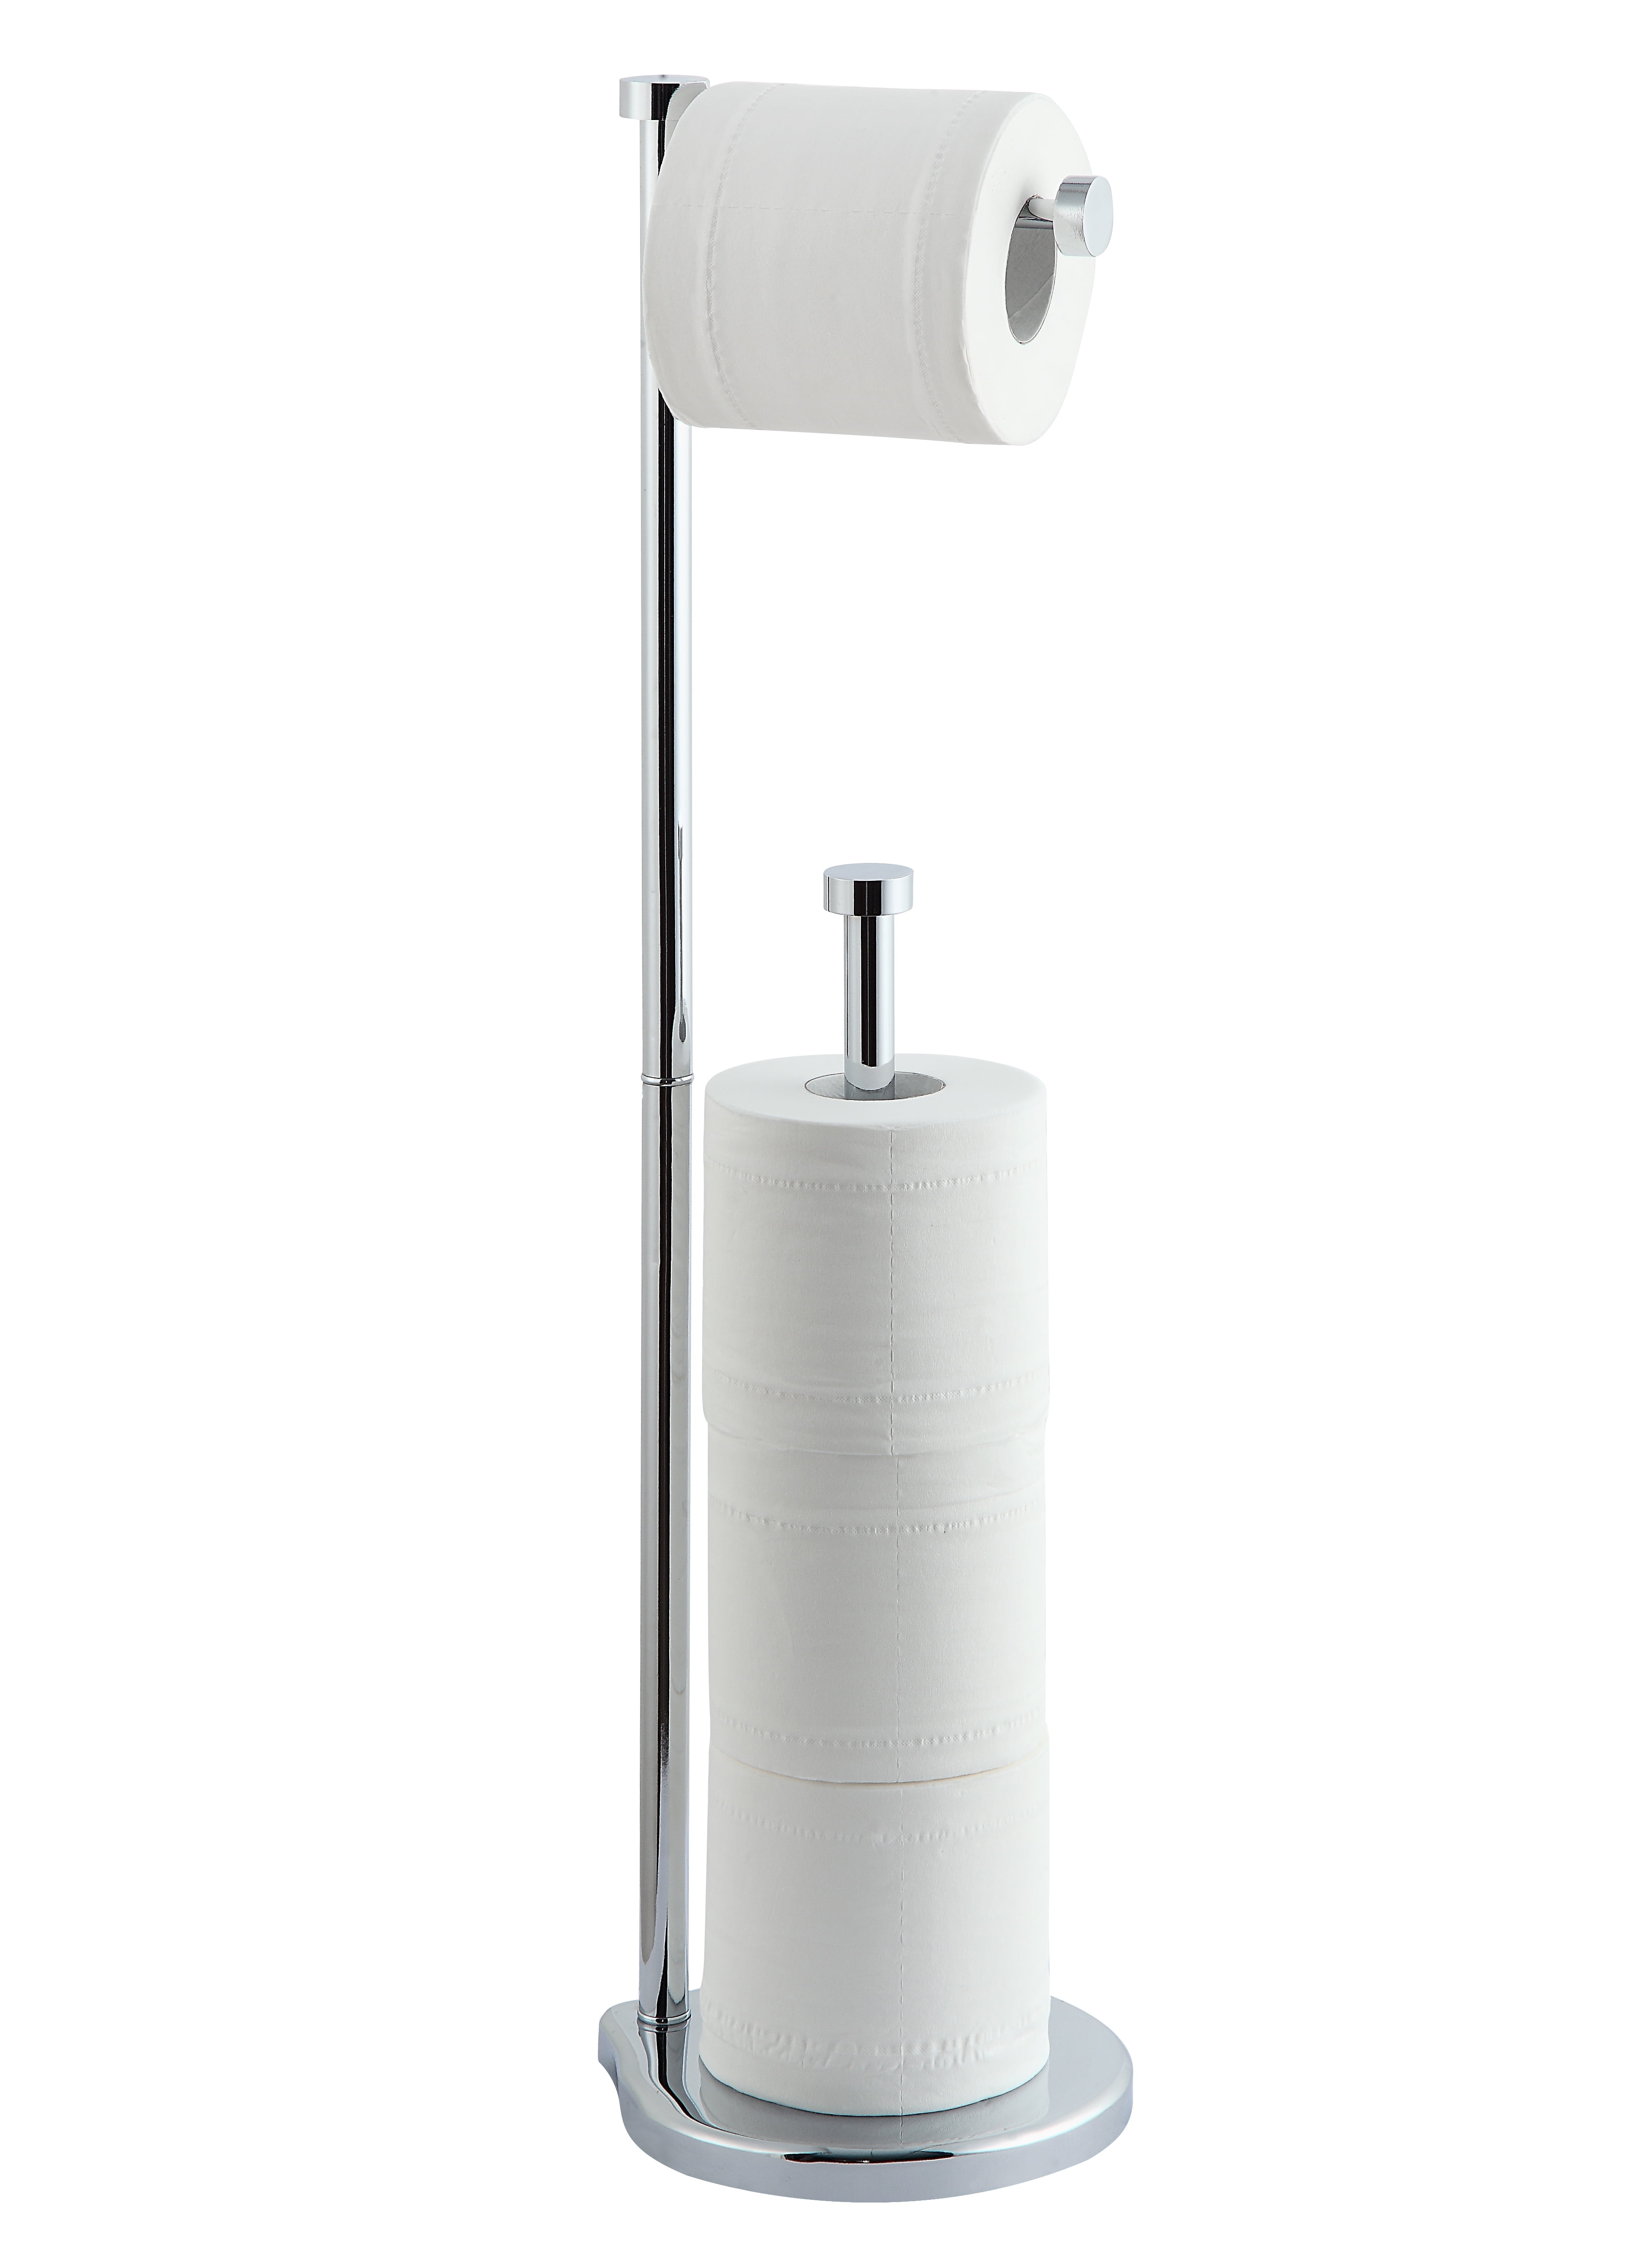 Free Standing Bathroom Toilet Paper Holder Stand with Reserve